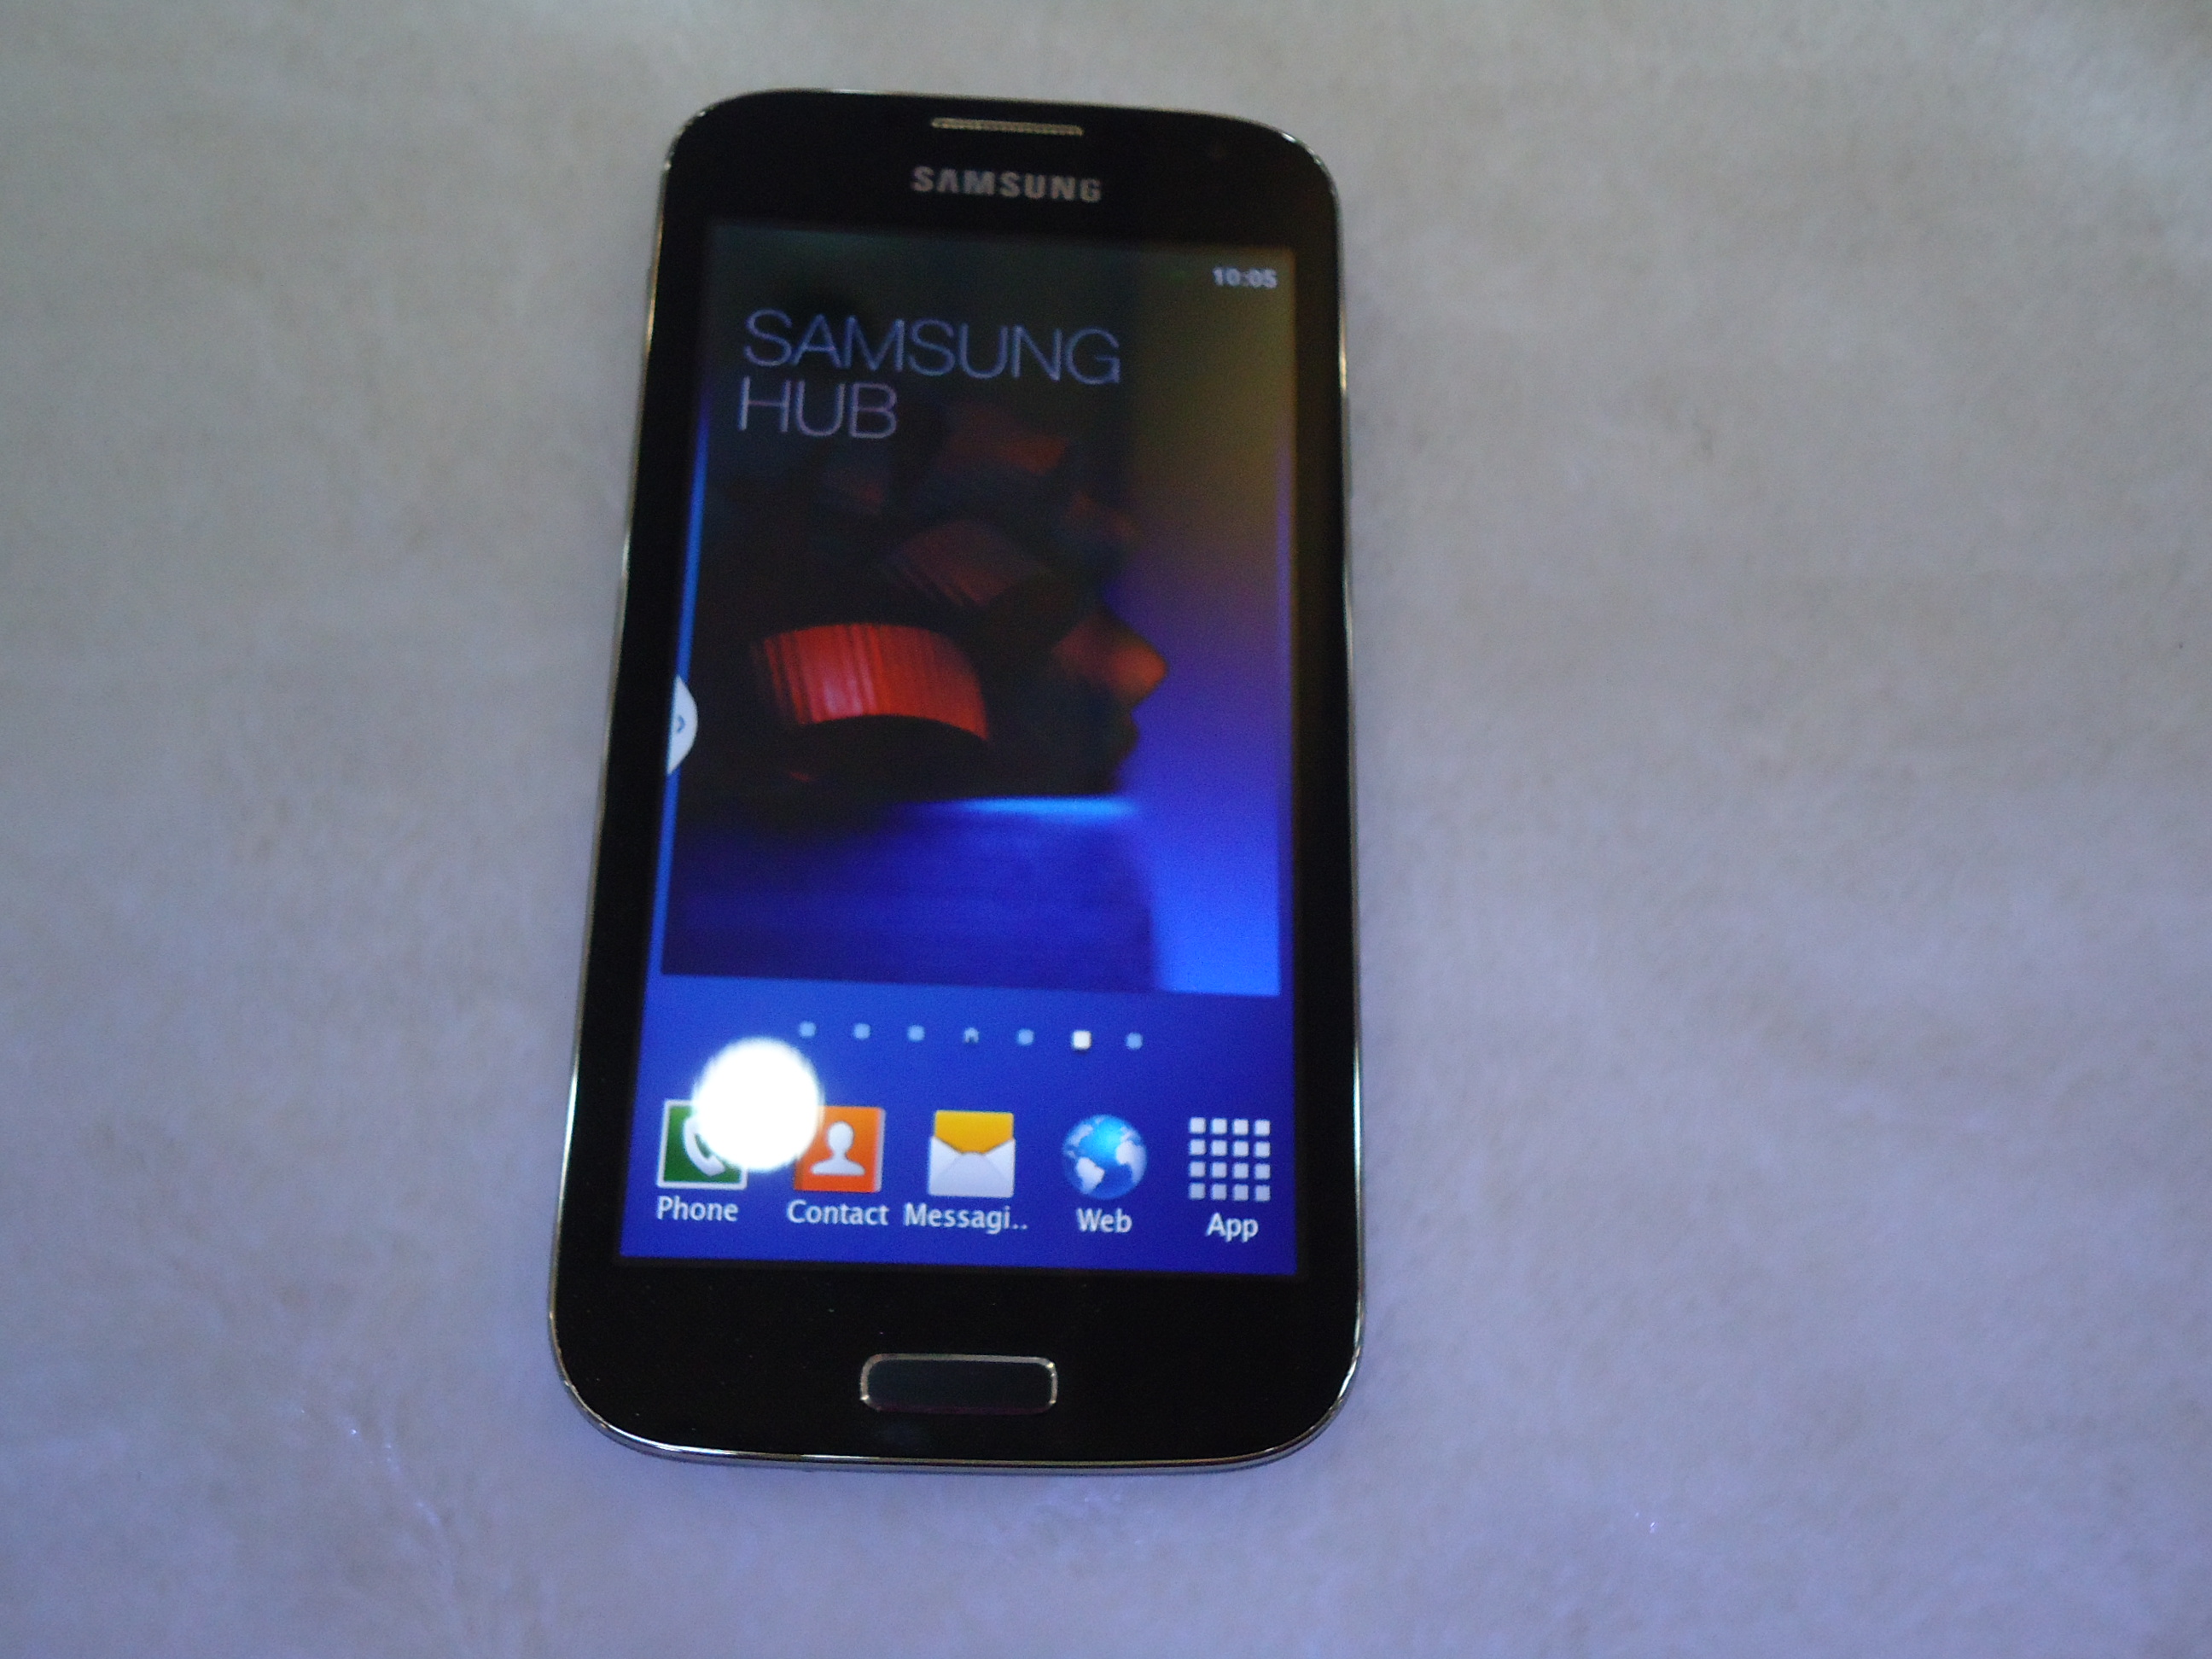 Msm8960 Driver Galaxy S4 Download - Programonly